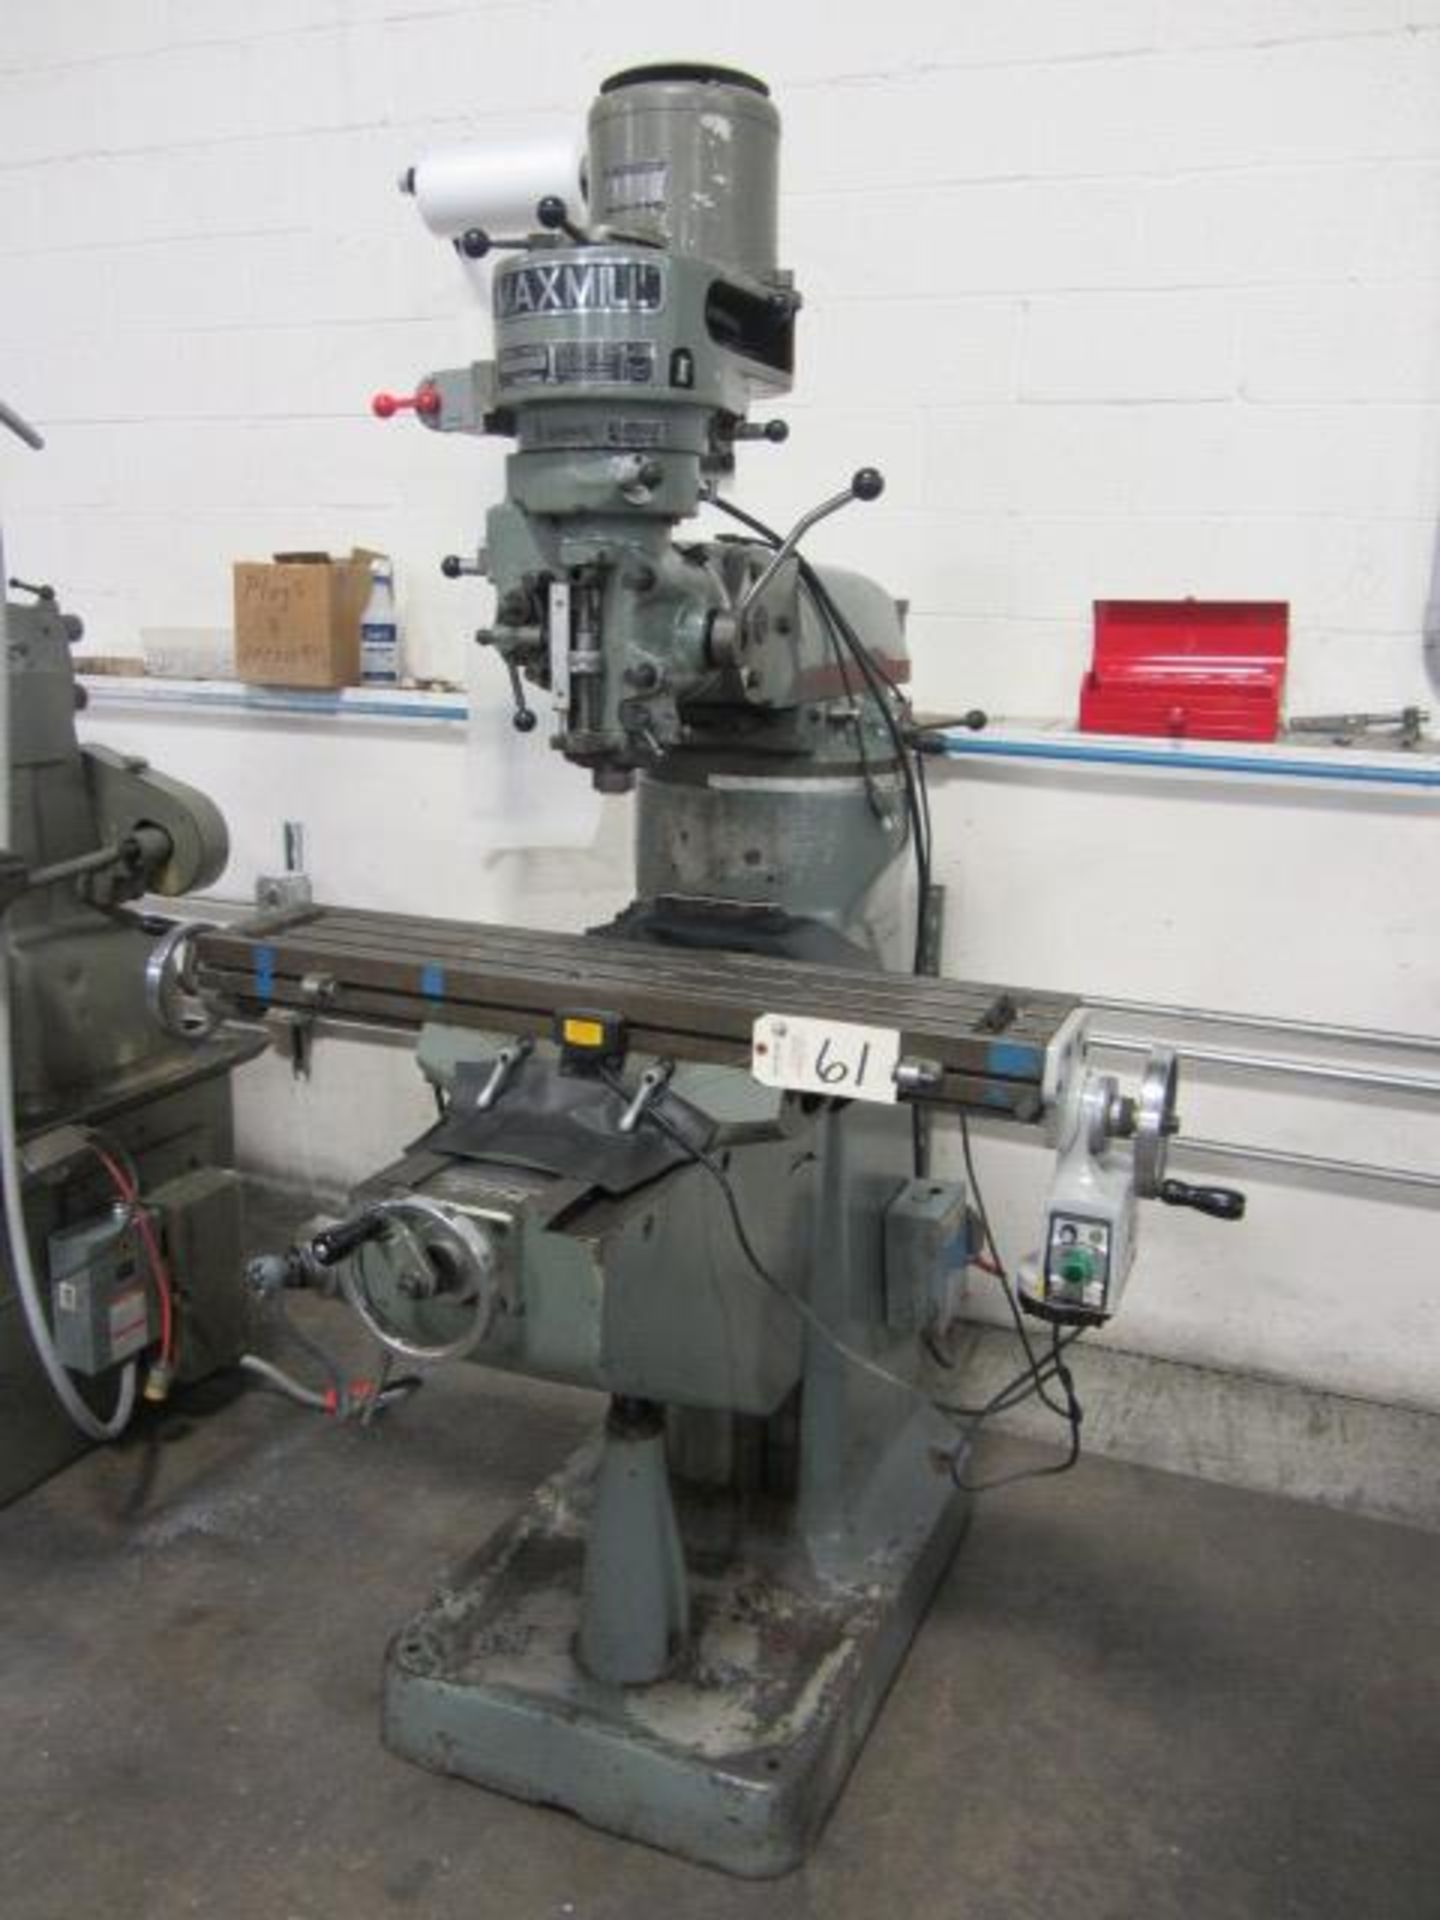 Maxmill Vertical Milling Machine with 9'' x 42'' Power Feed Table, R-8 Spindle Speeds to 2720 RPM,